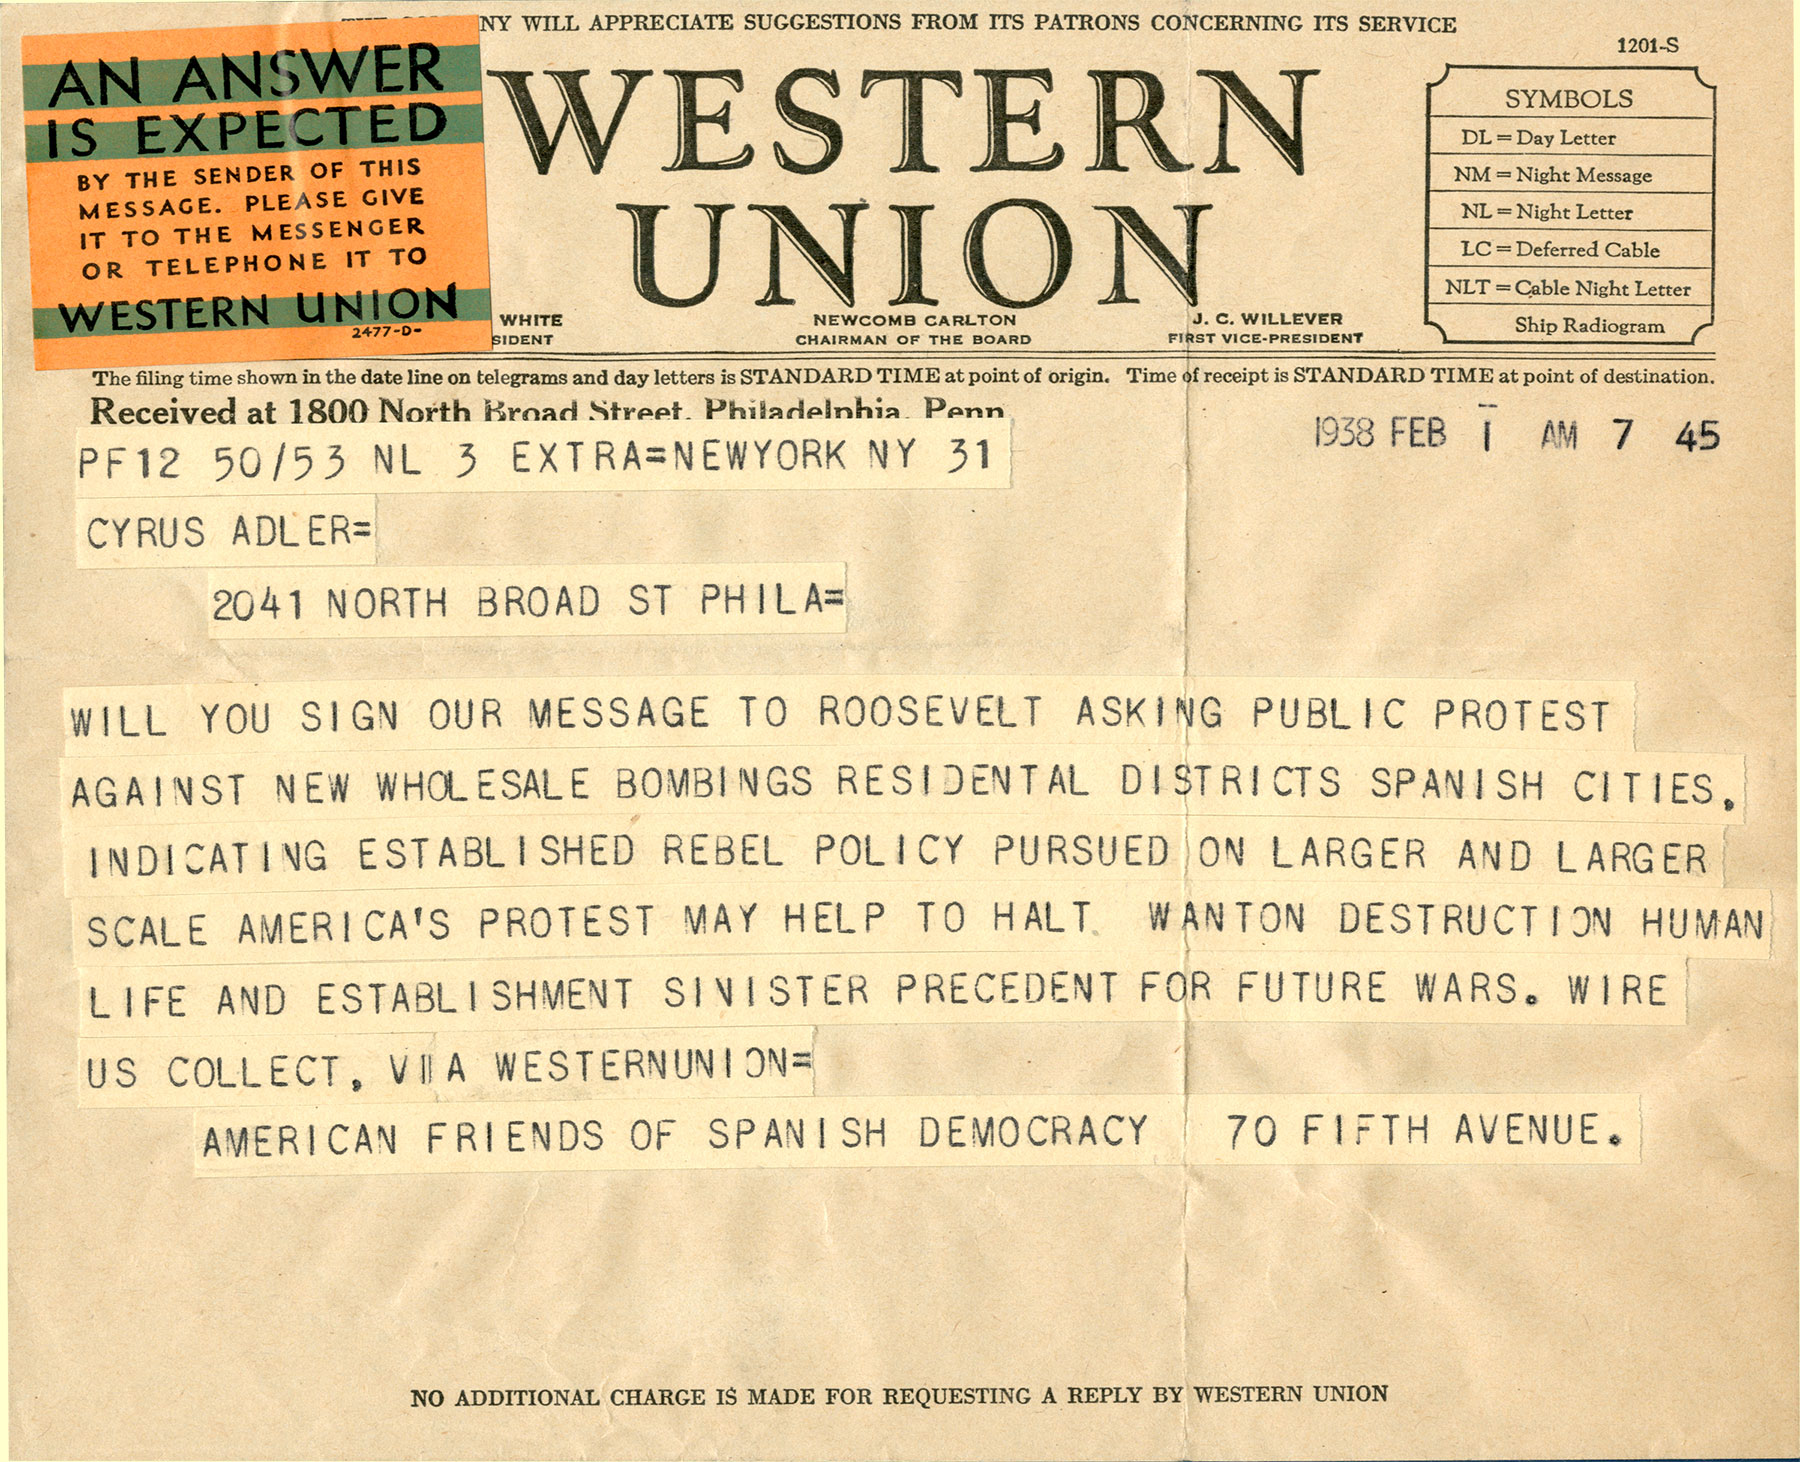 Telegram seeking Adler's endorsement of a petition from American Friends of Spanish Democracy to Roosevelt